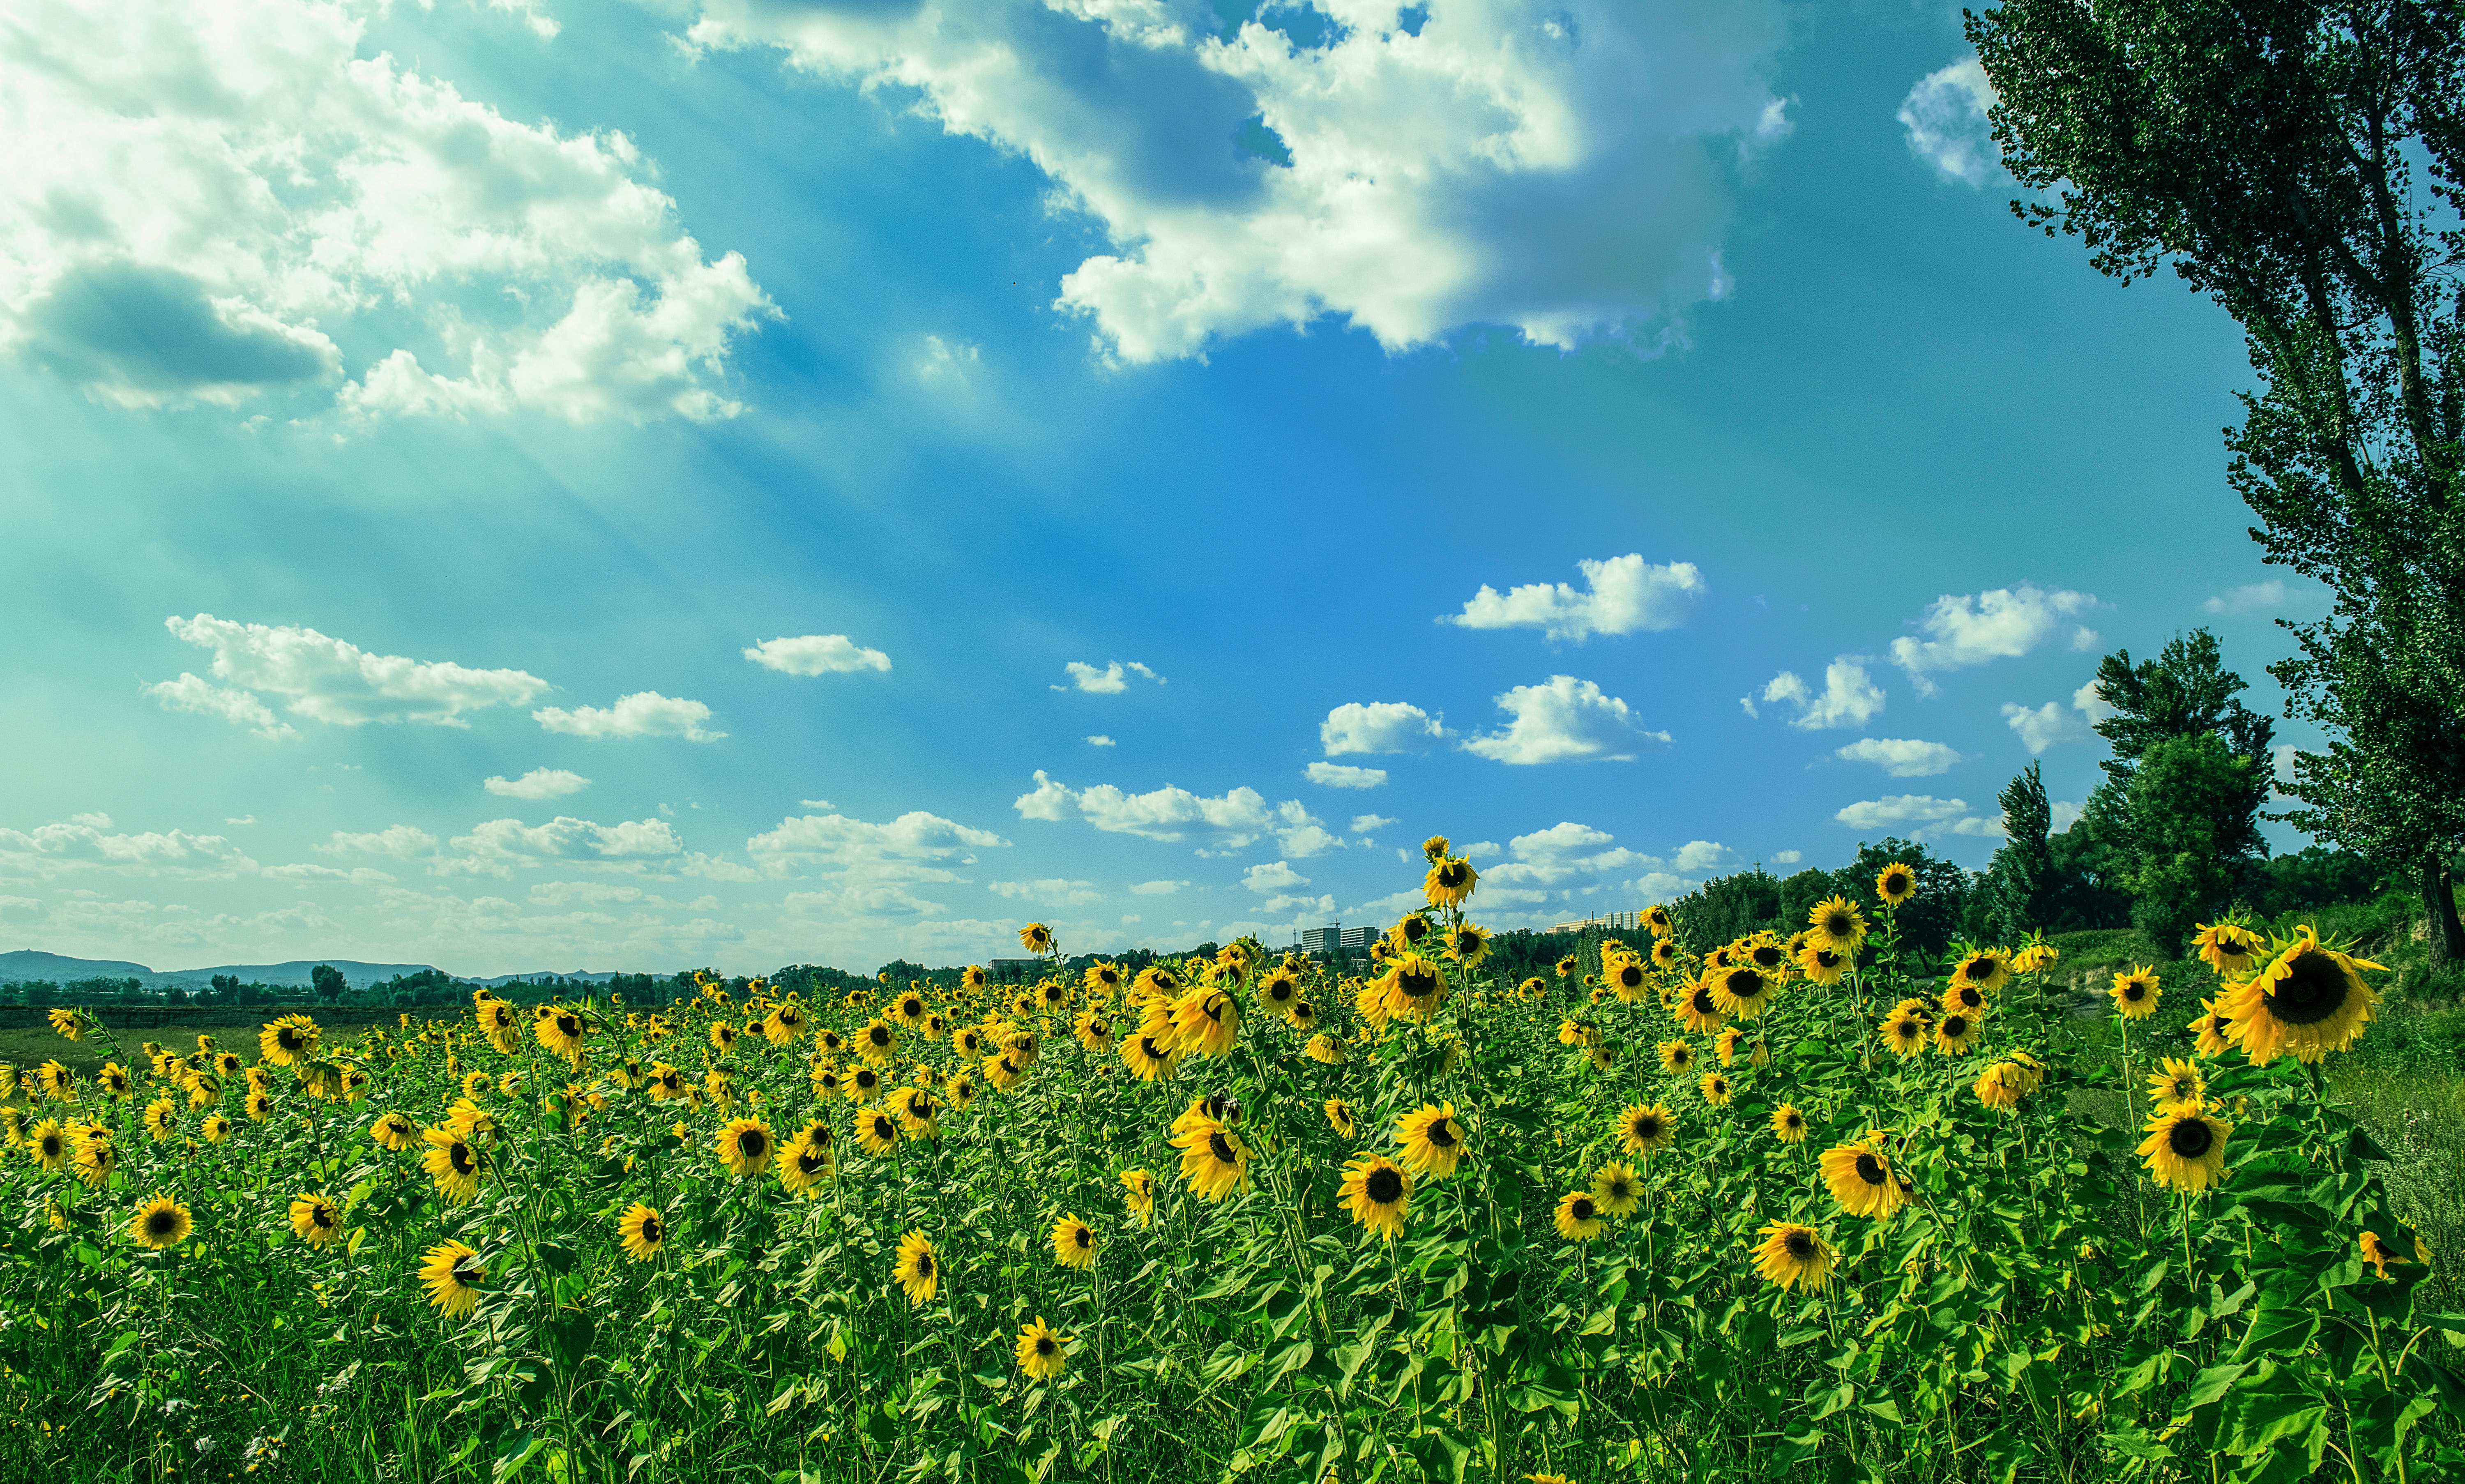 Yellow sunflower field under blue and white sky photo